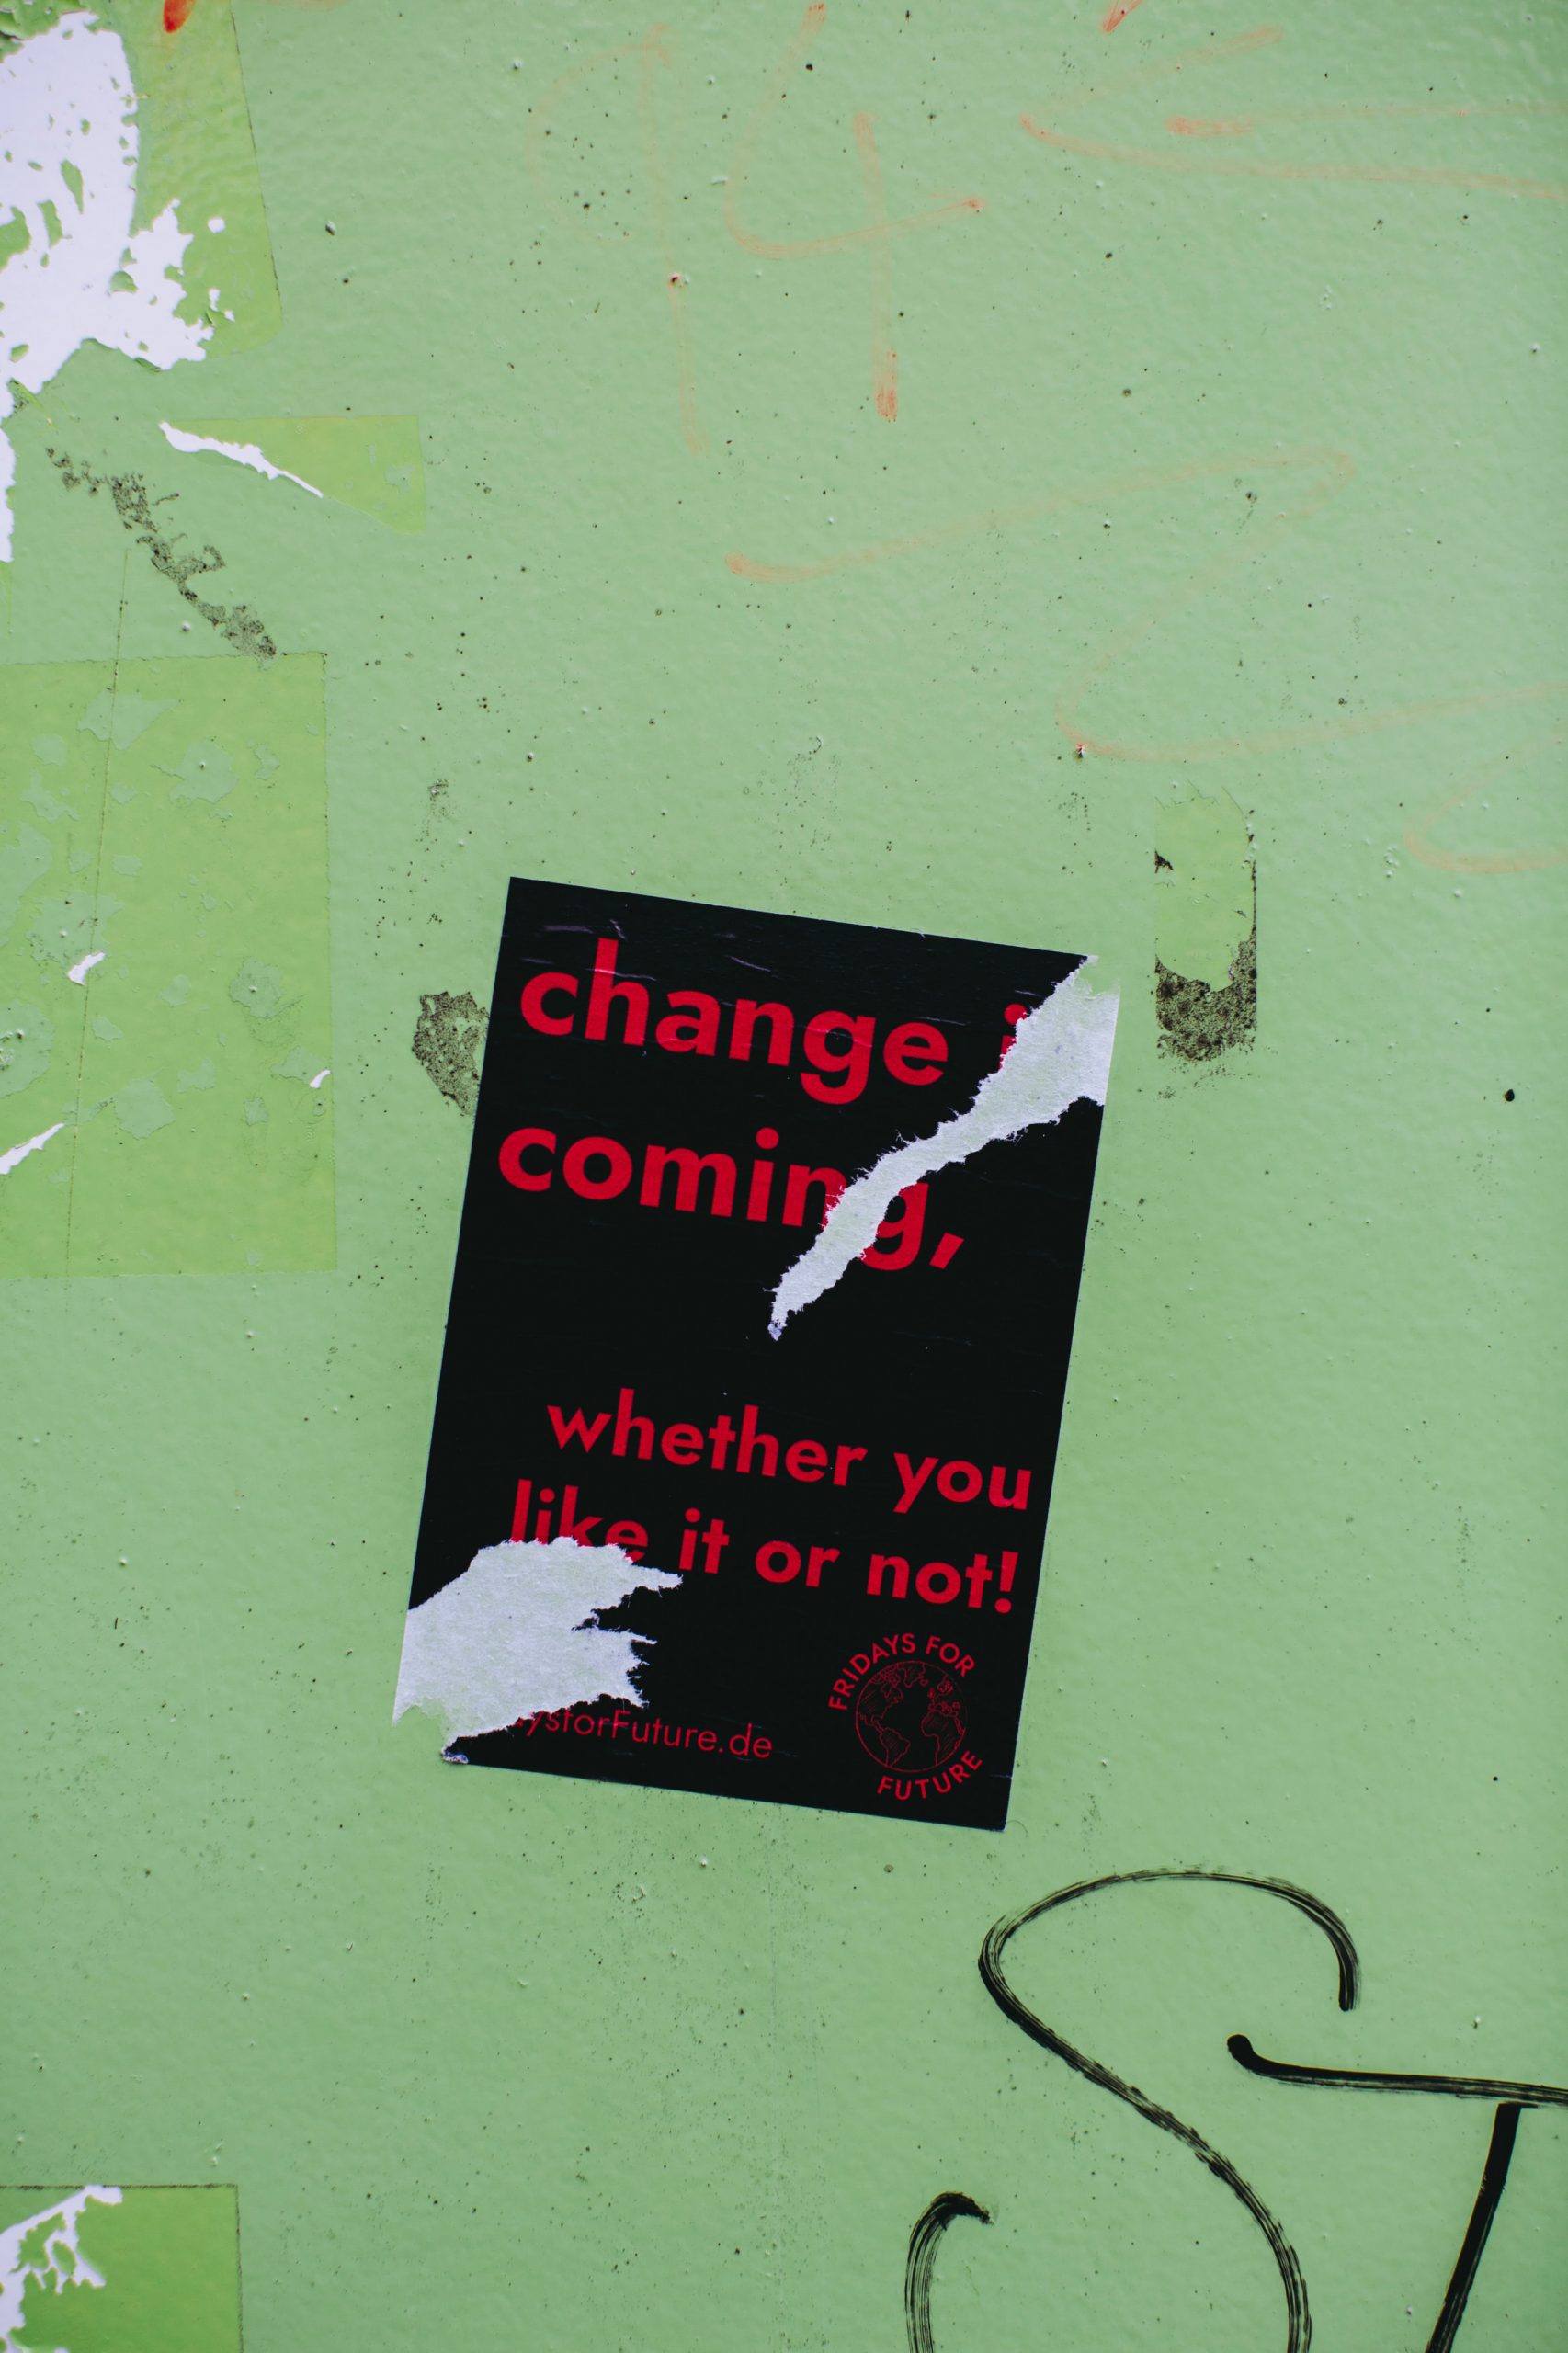 black and red book with "Change Is Coming, whether you like it or not!" in text on cover